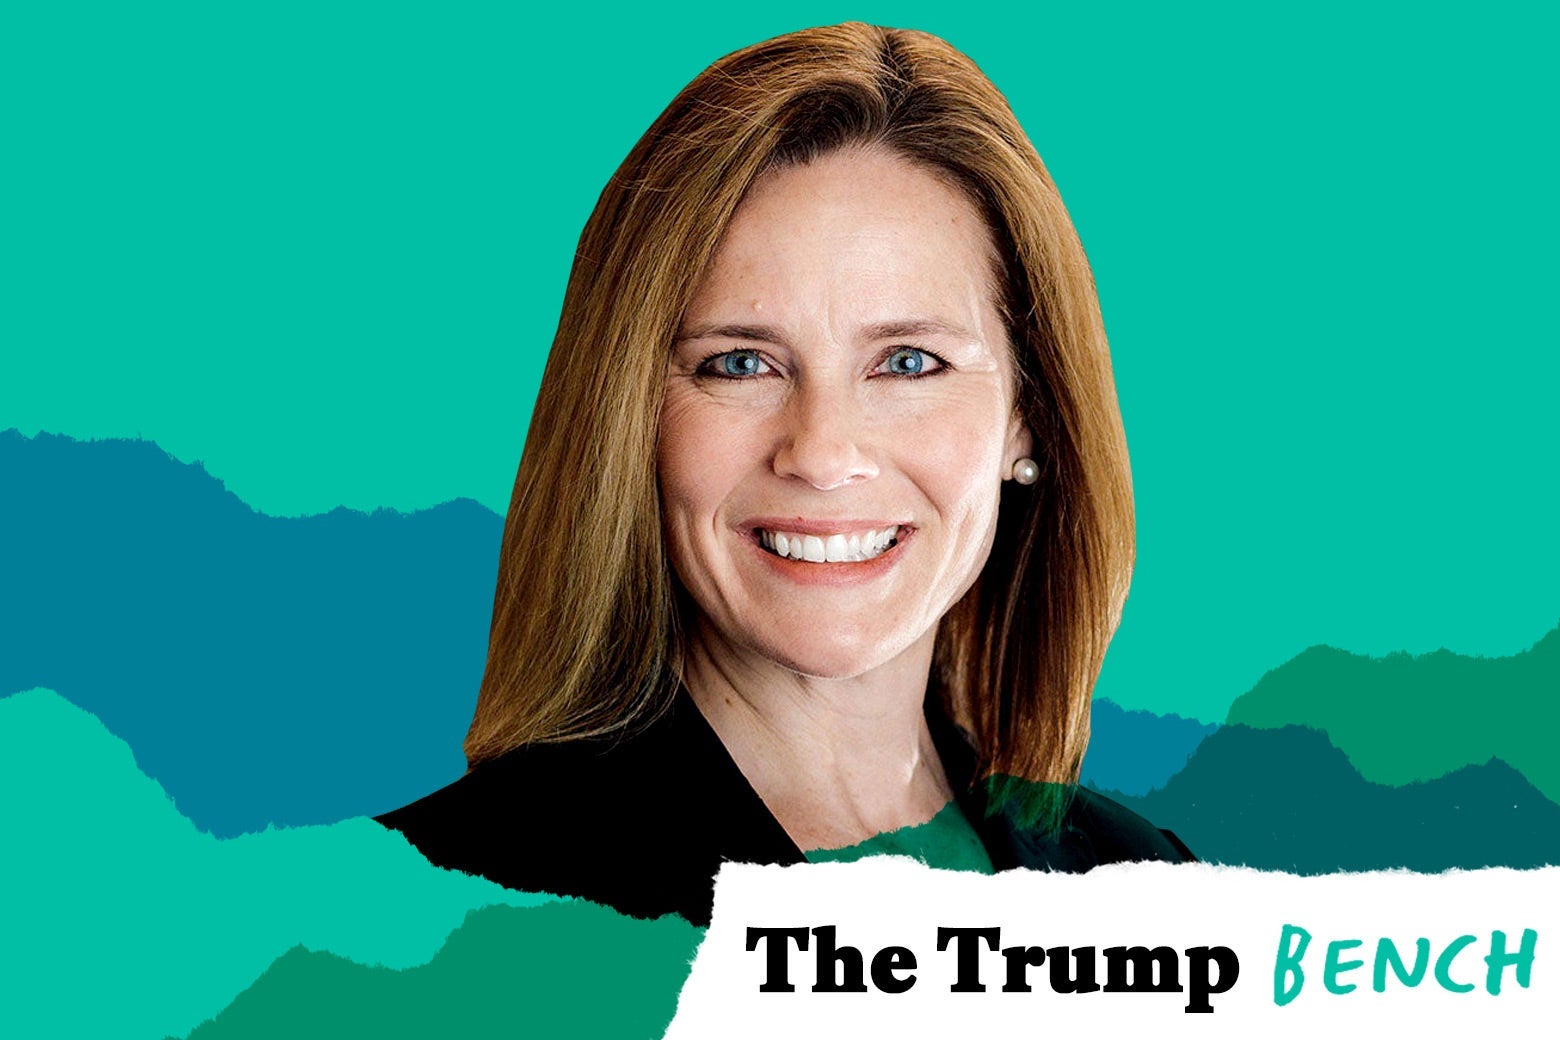 Amy Coney Barrett with text in the bottom right corner that says, "The Trump Bench."